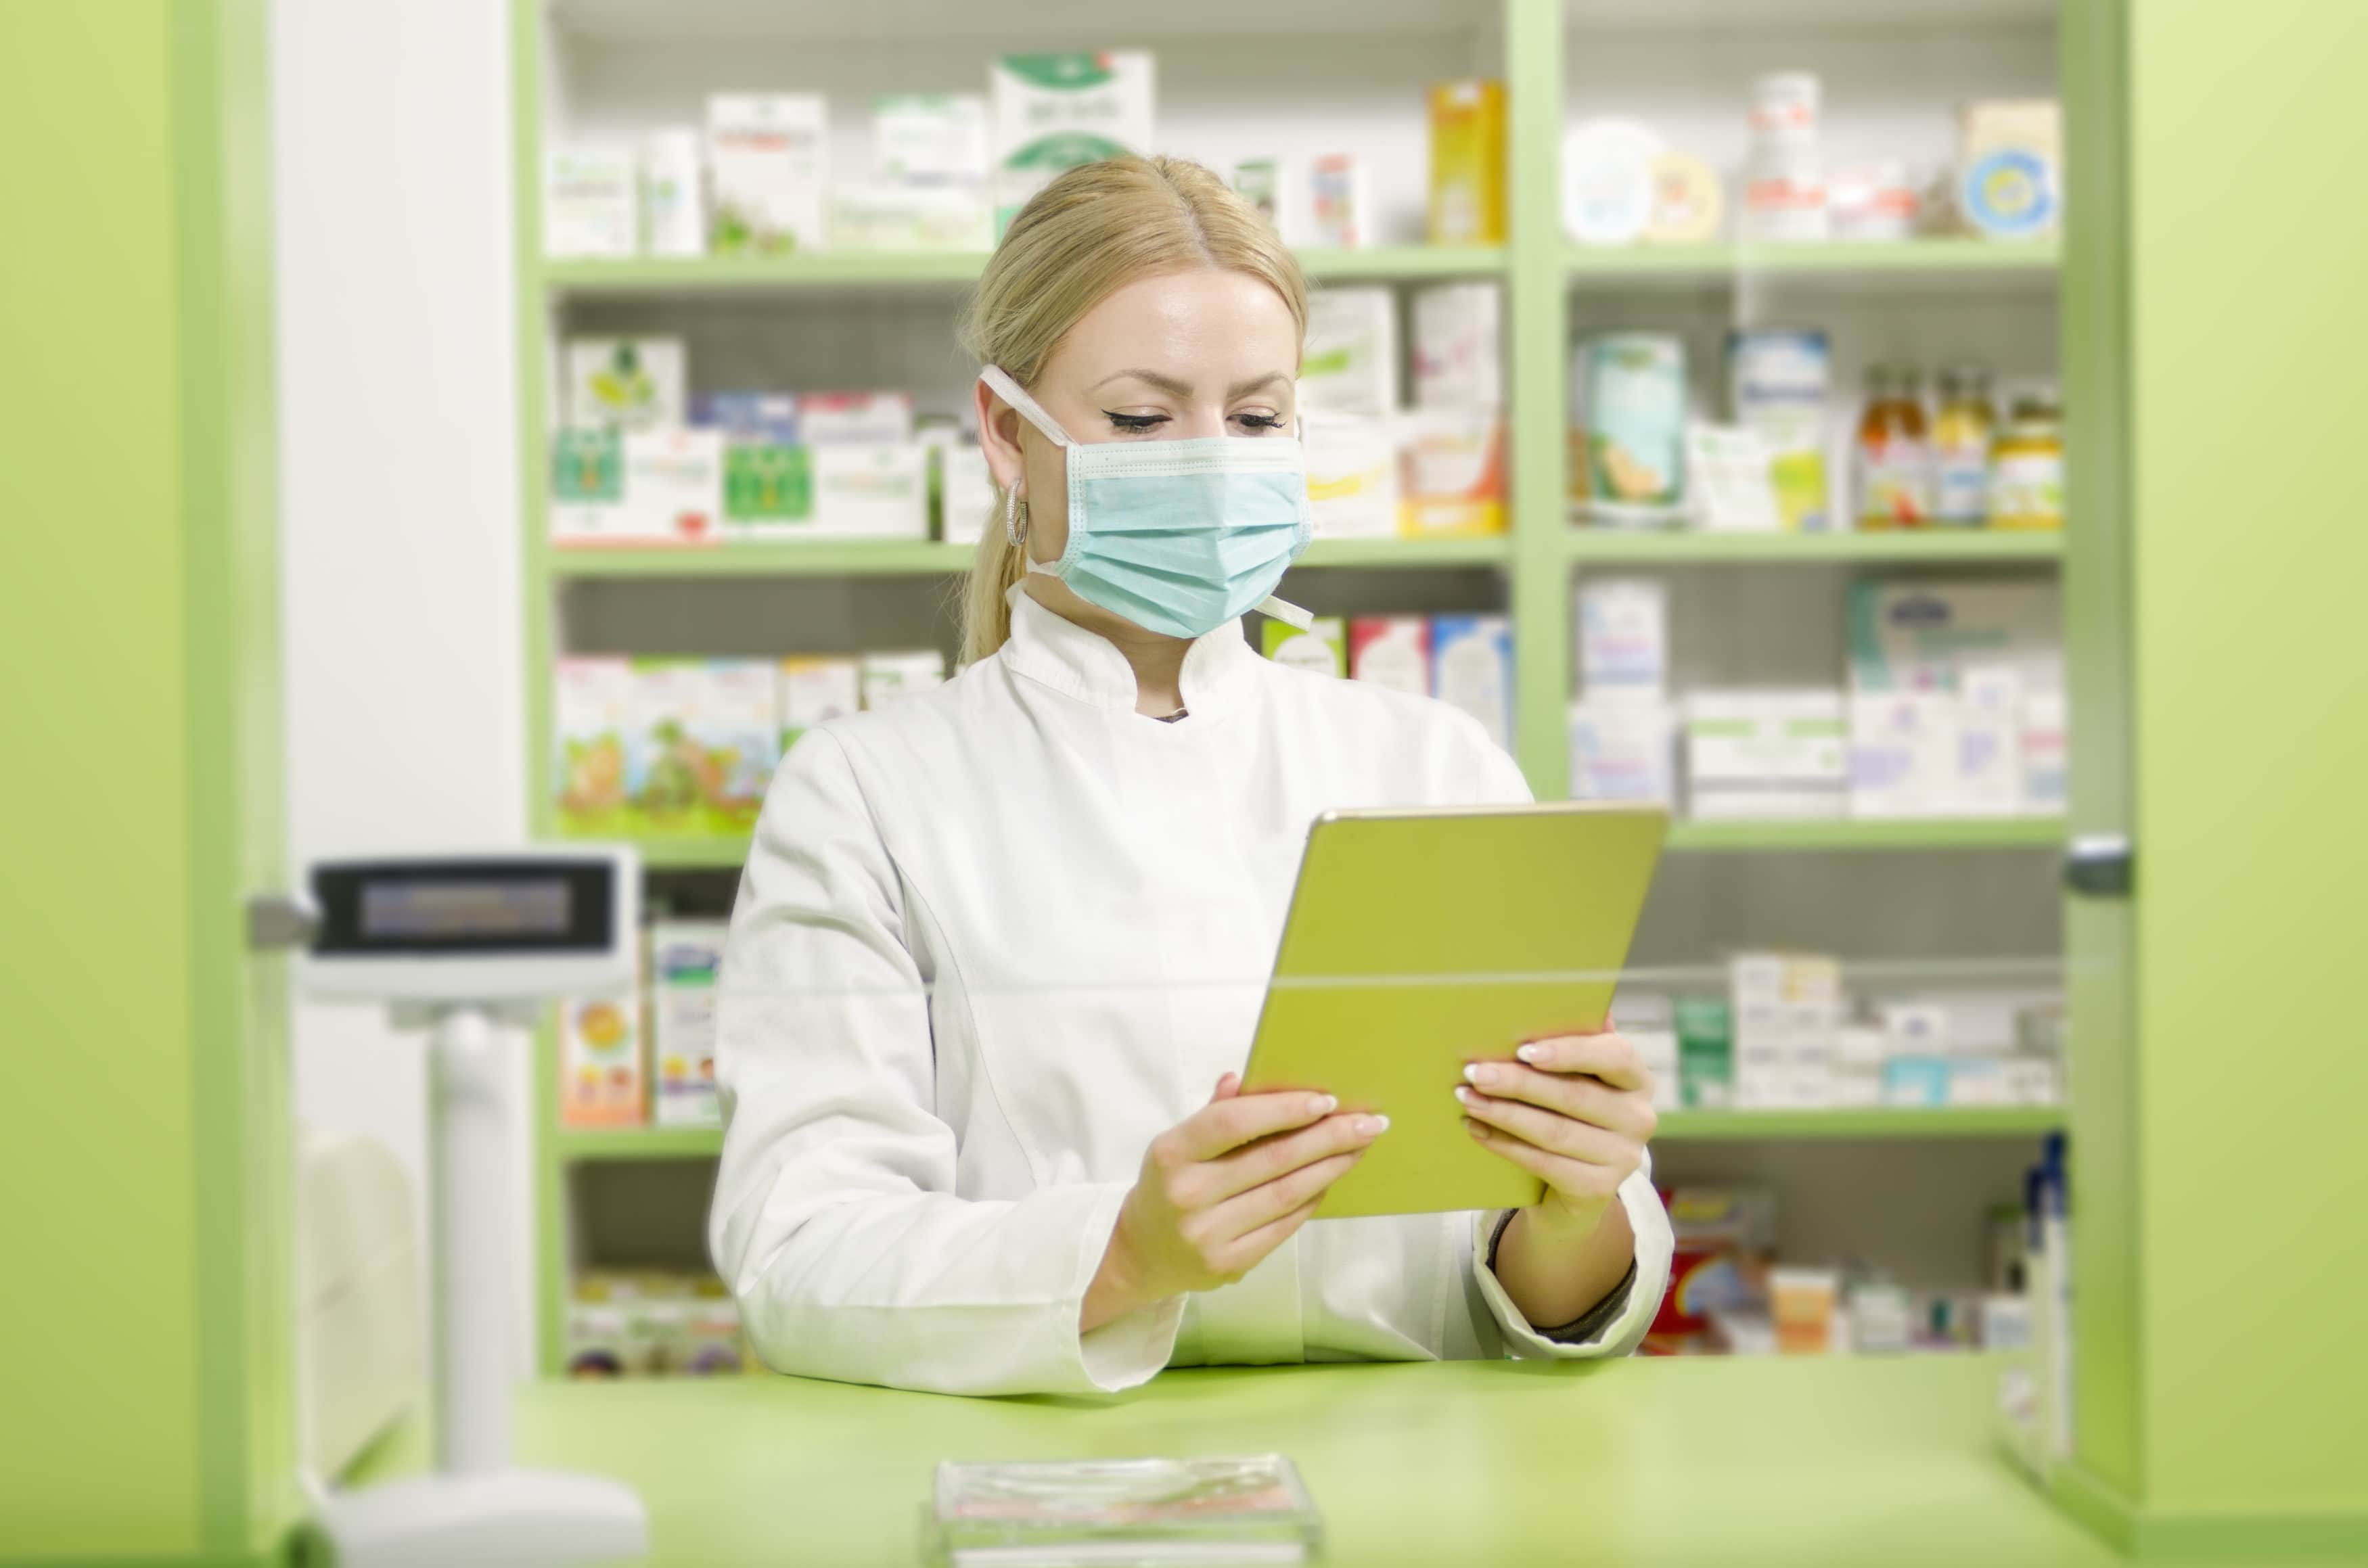 Female pharmacist with surgical mask behind cash register holding tablet in her hands